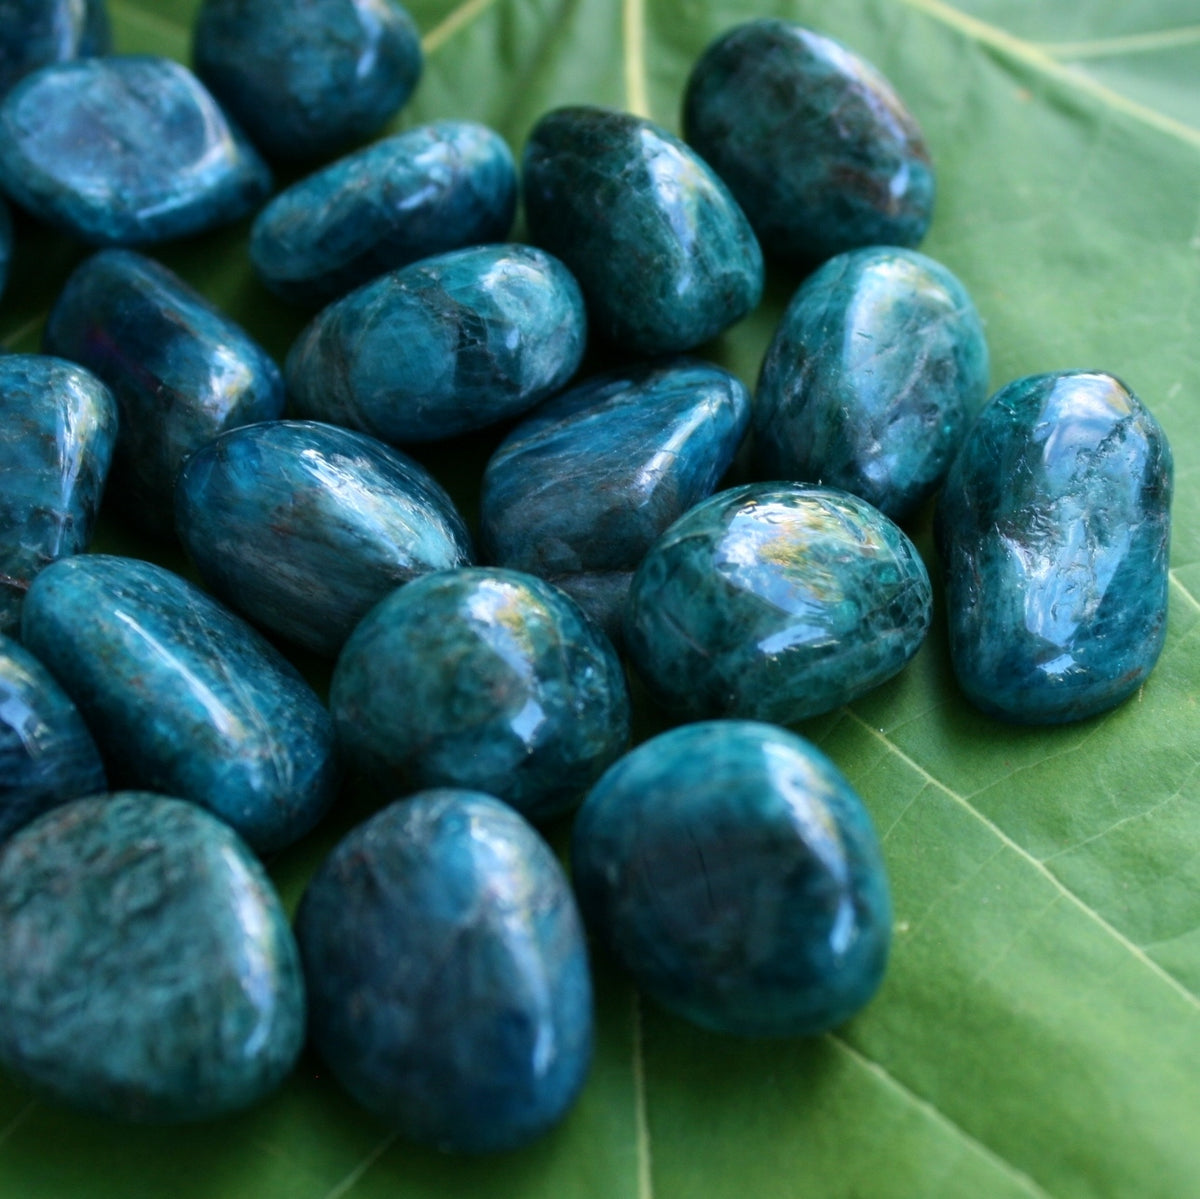 ONE Blue Apatite Polished Tumbled Stone from Madagascar, 6-10 grams each